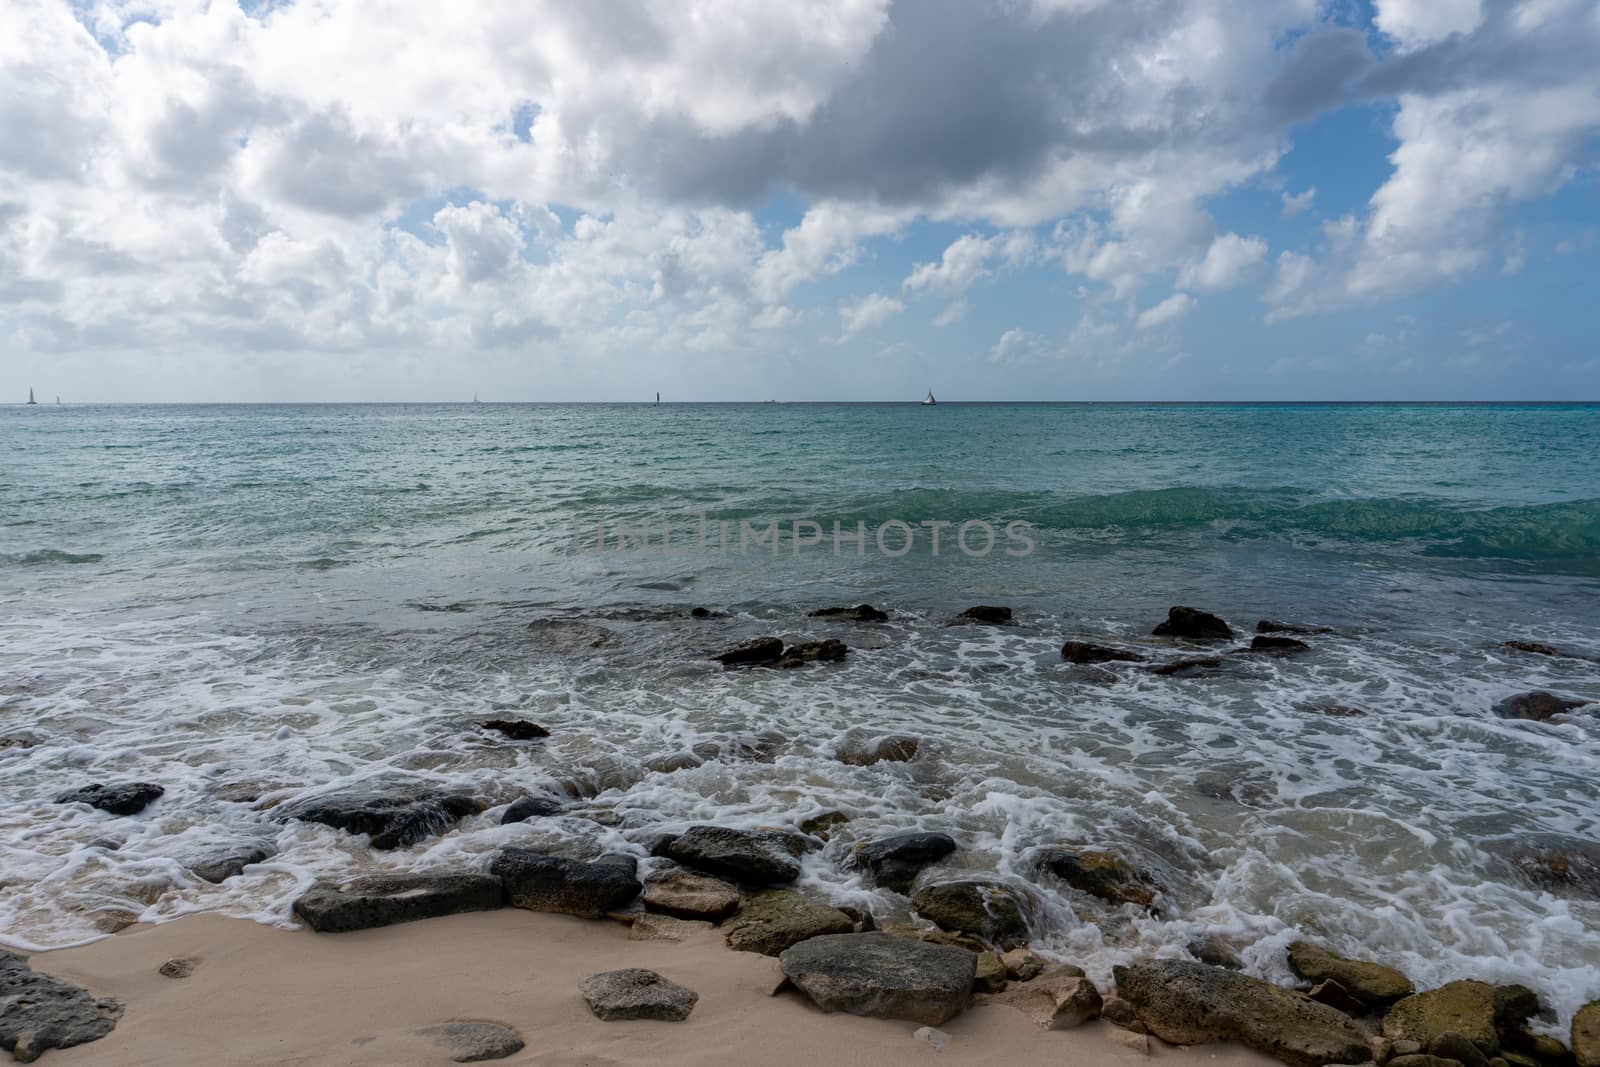 Panorama of the Caribbean Sea from the shore covered with large stones that break the waves

